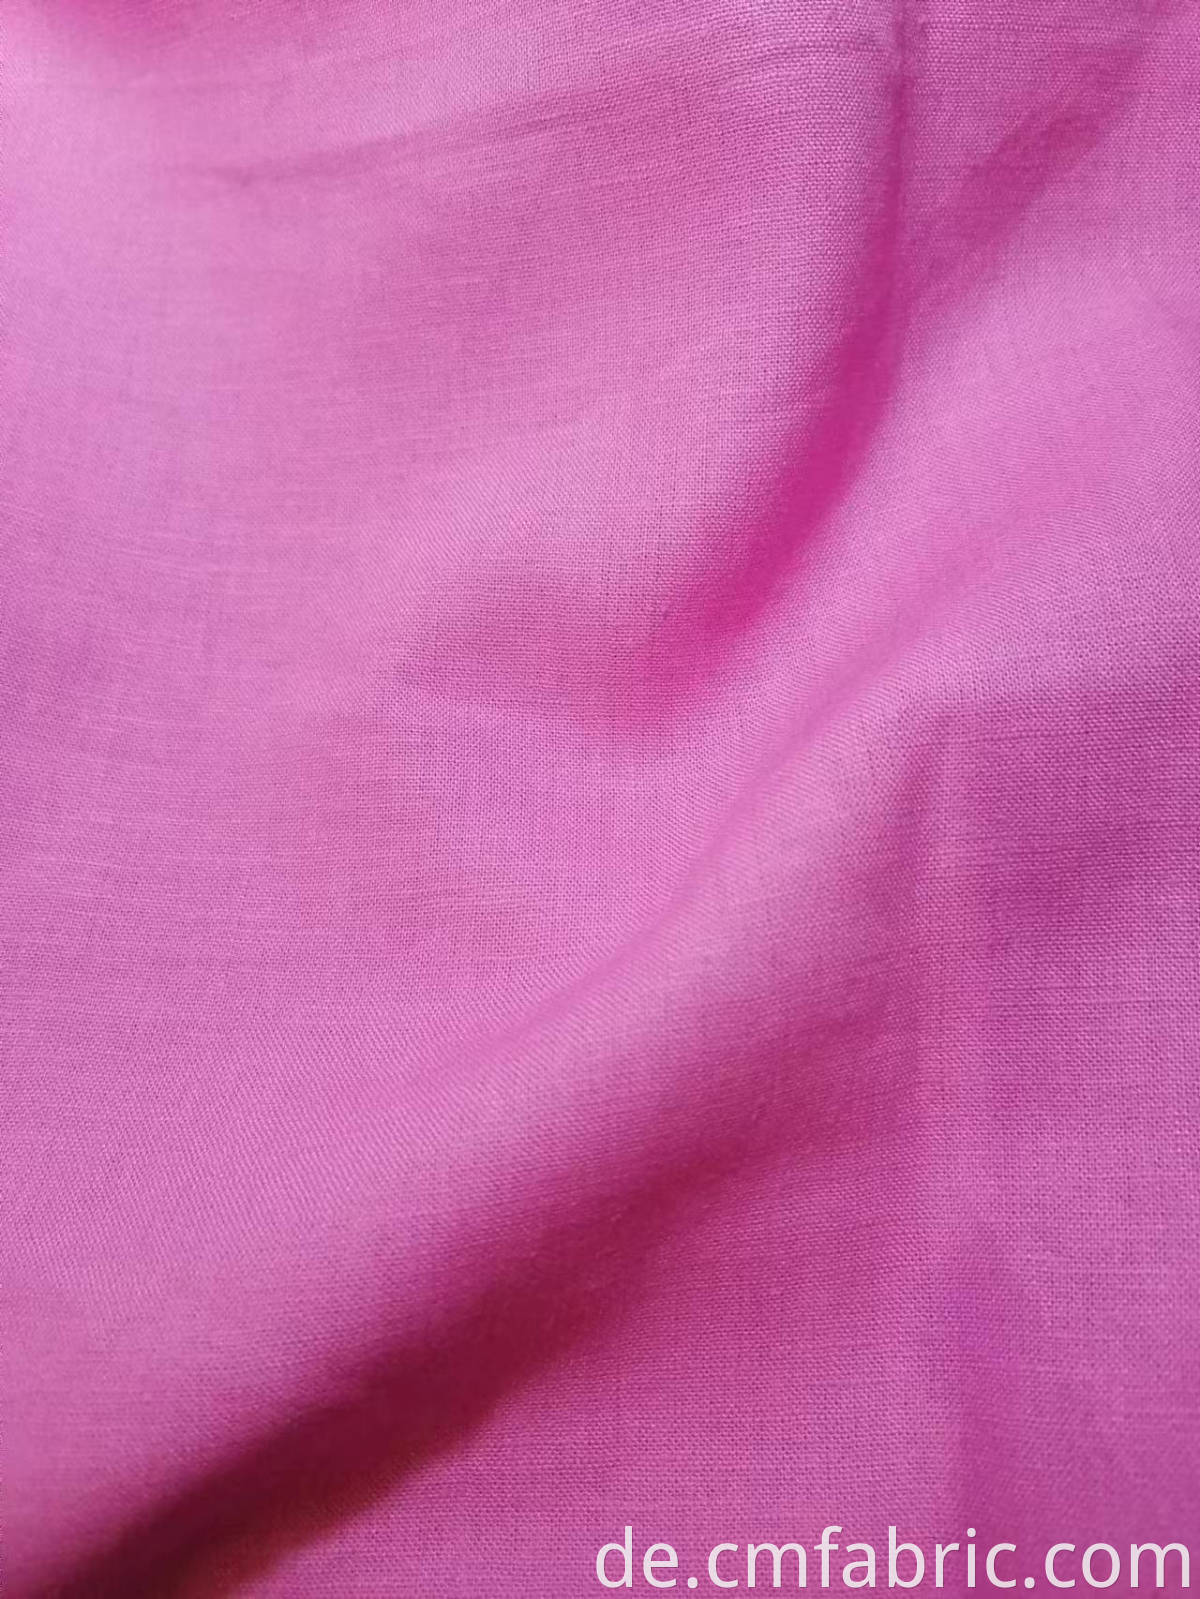 LINEN RAYON FABRIC 140GSM FOR SUMMER